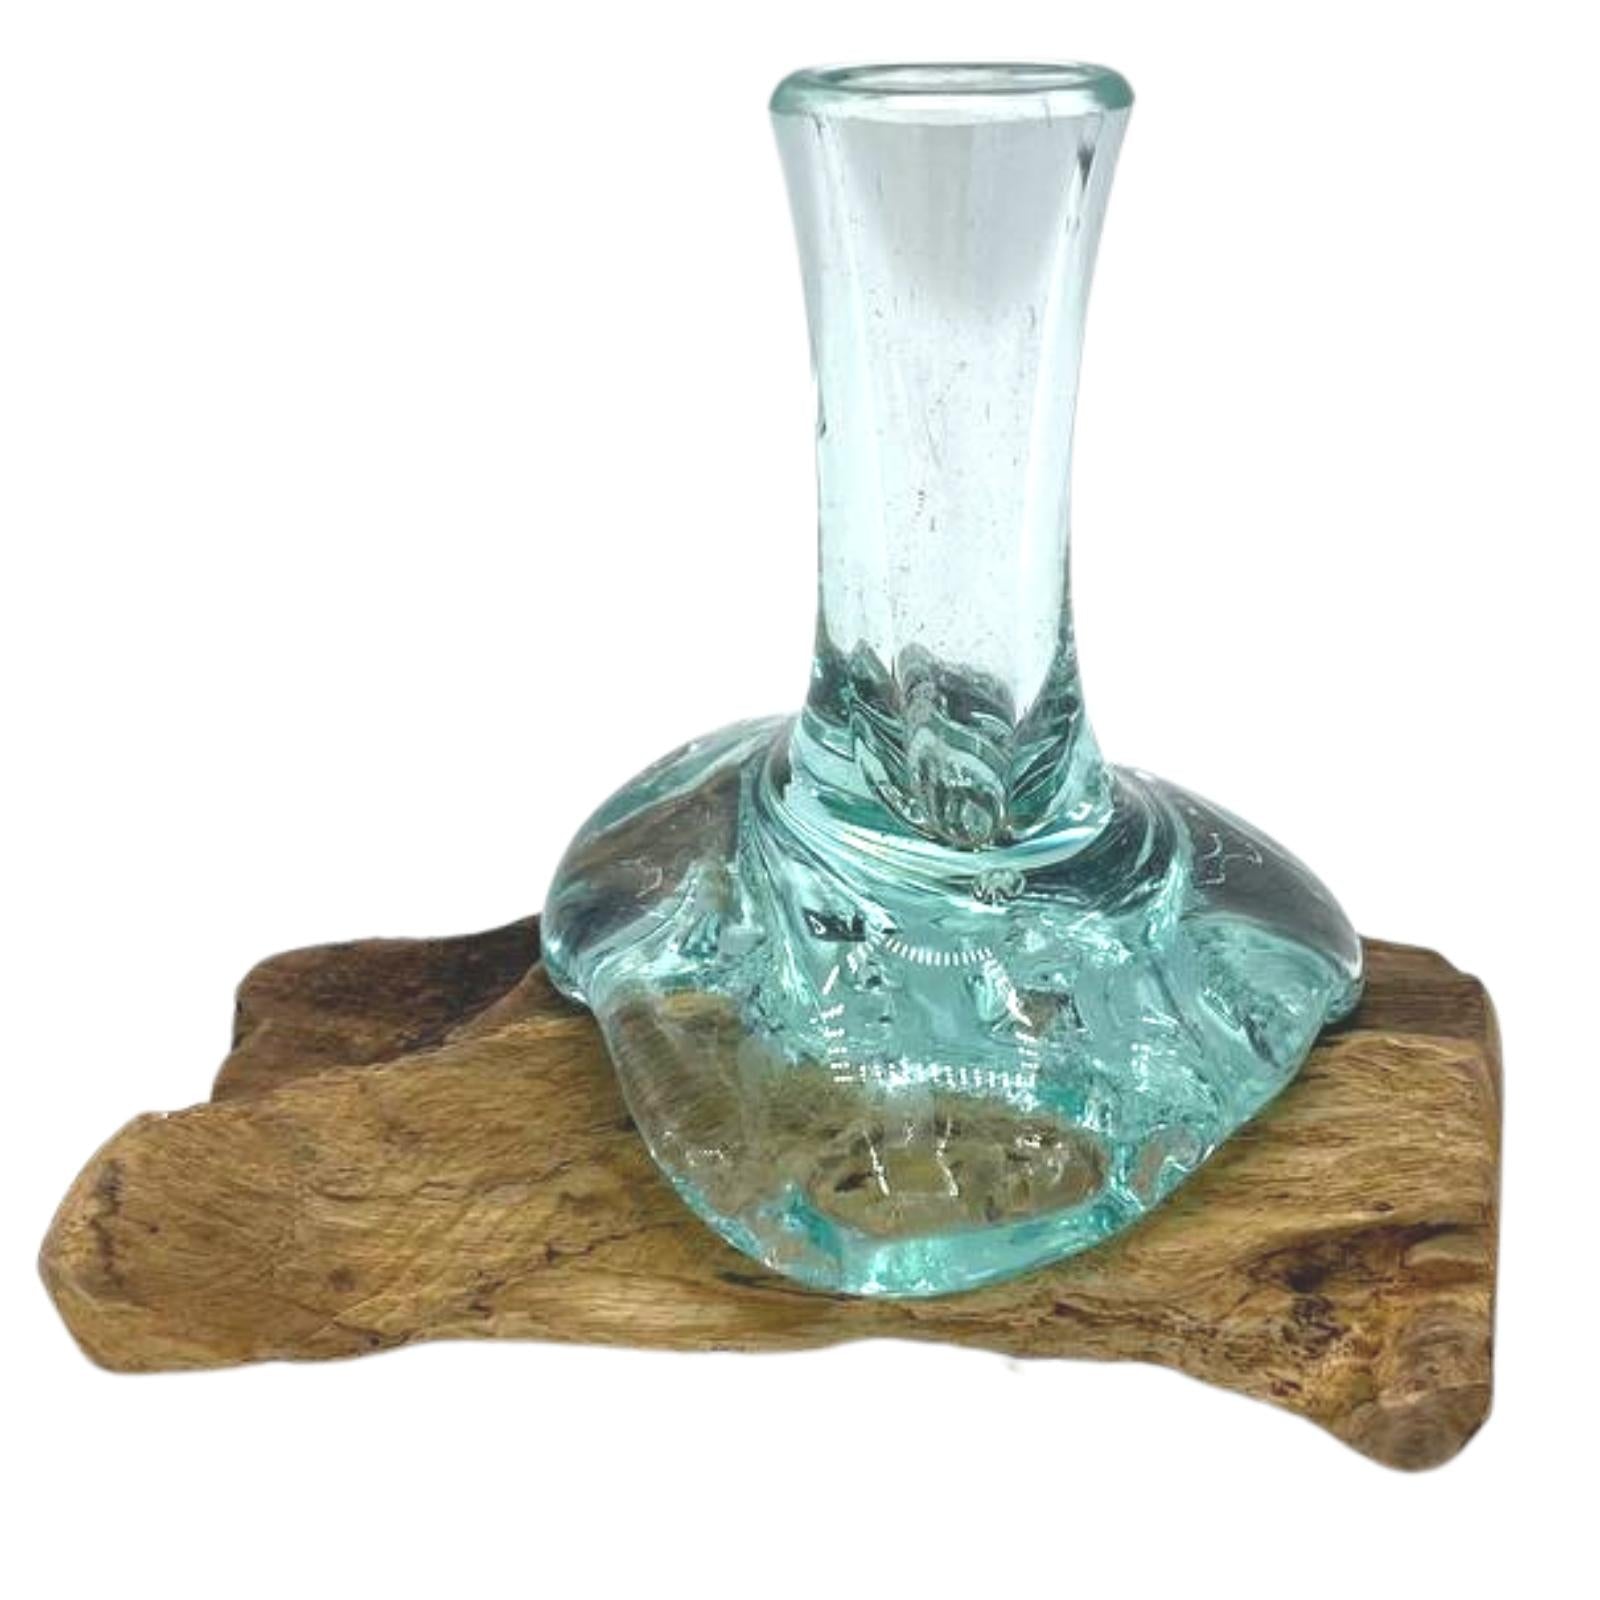 View Molton Glass Small Flower Vase on Wood information